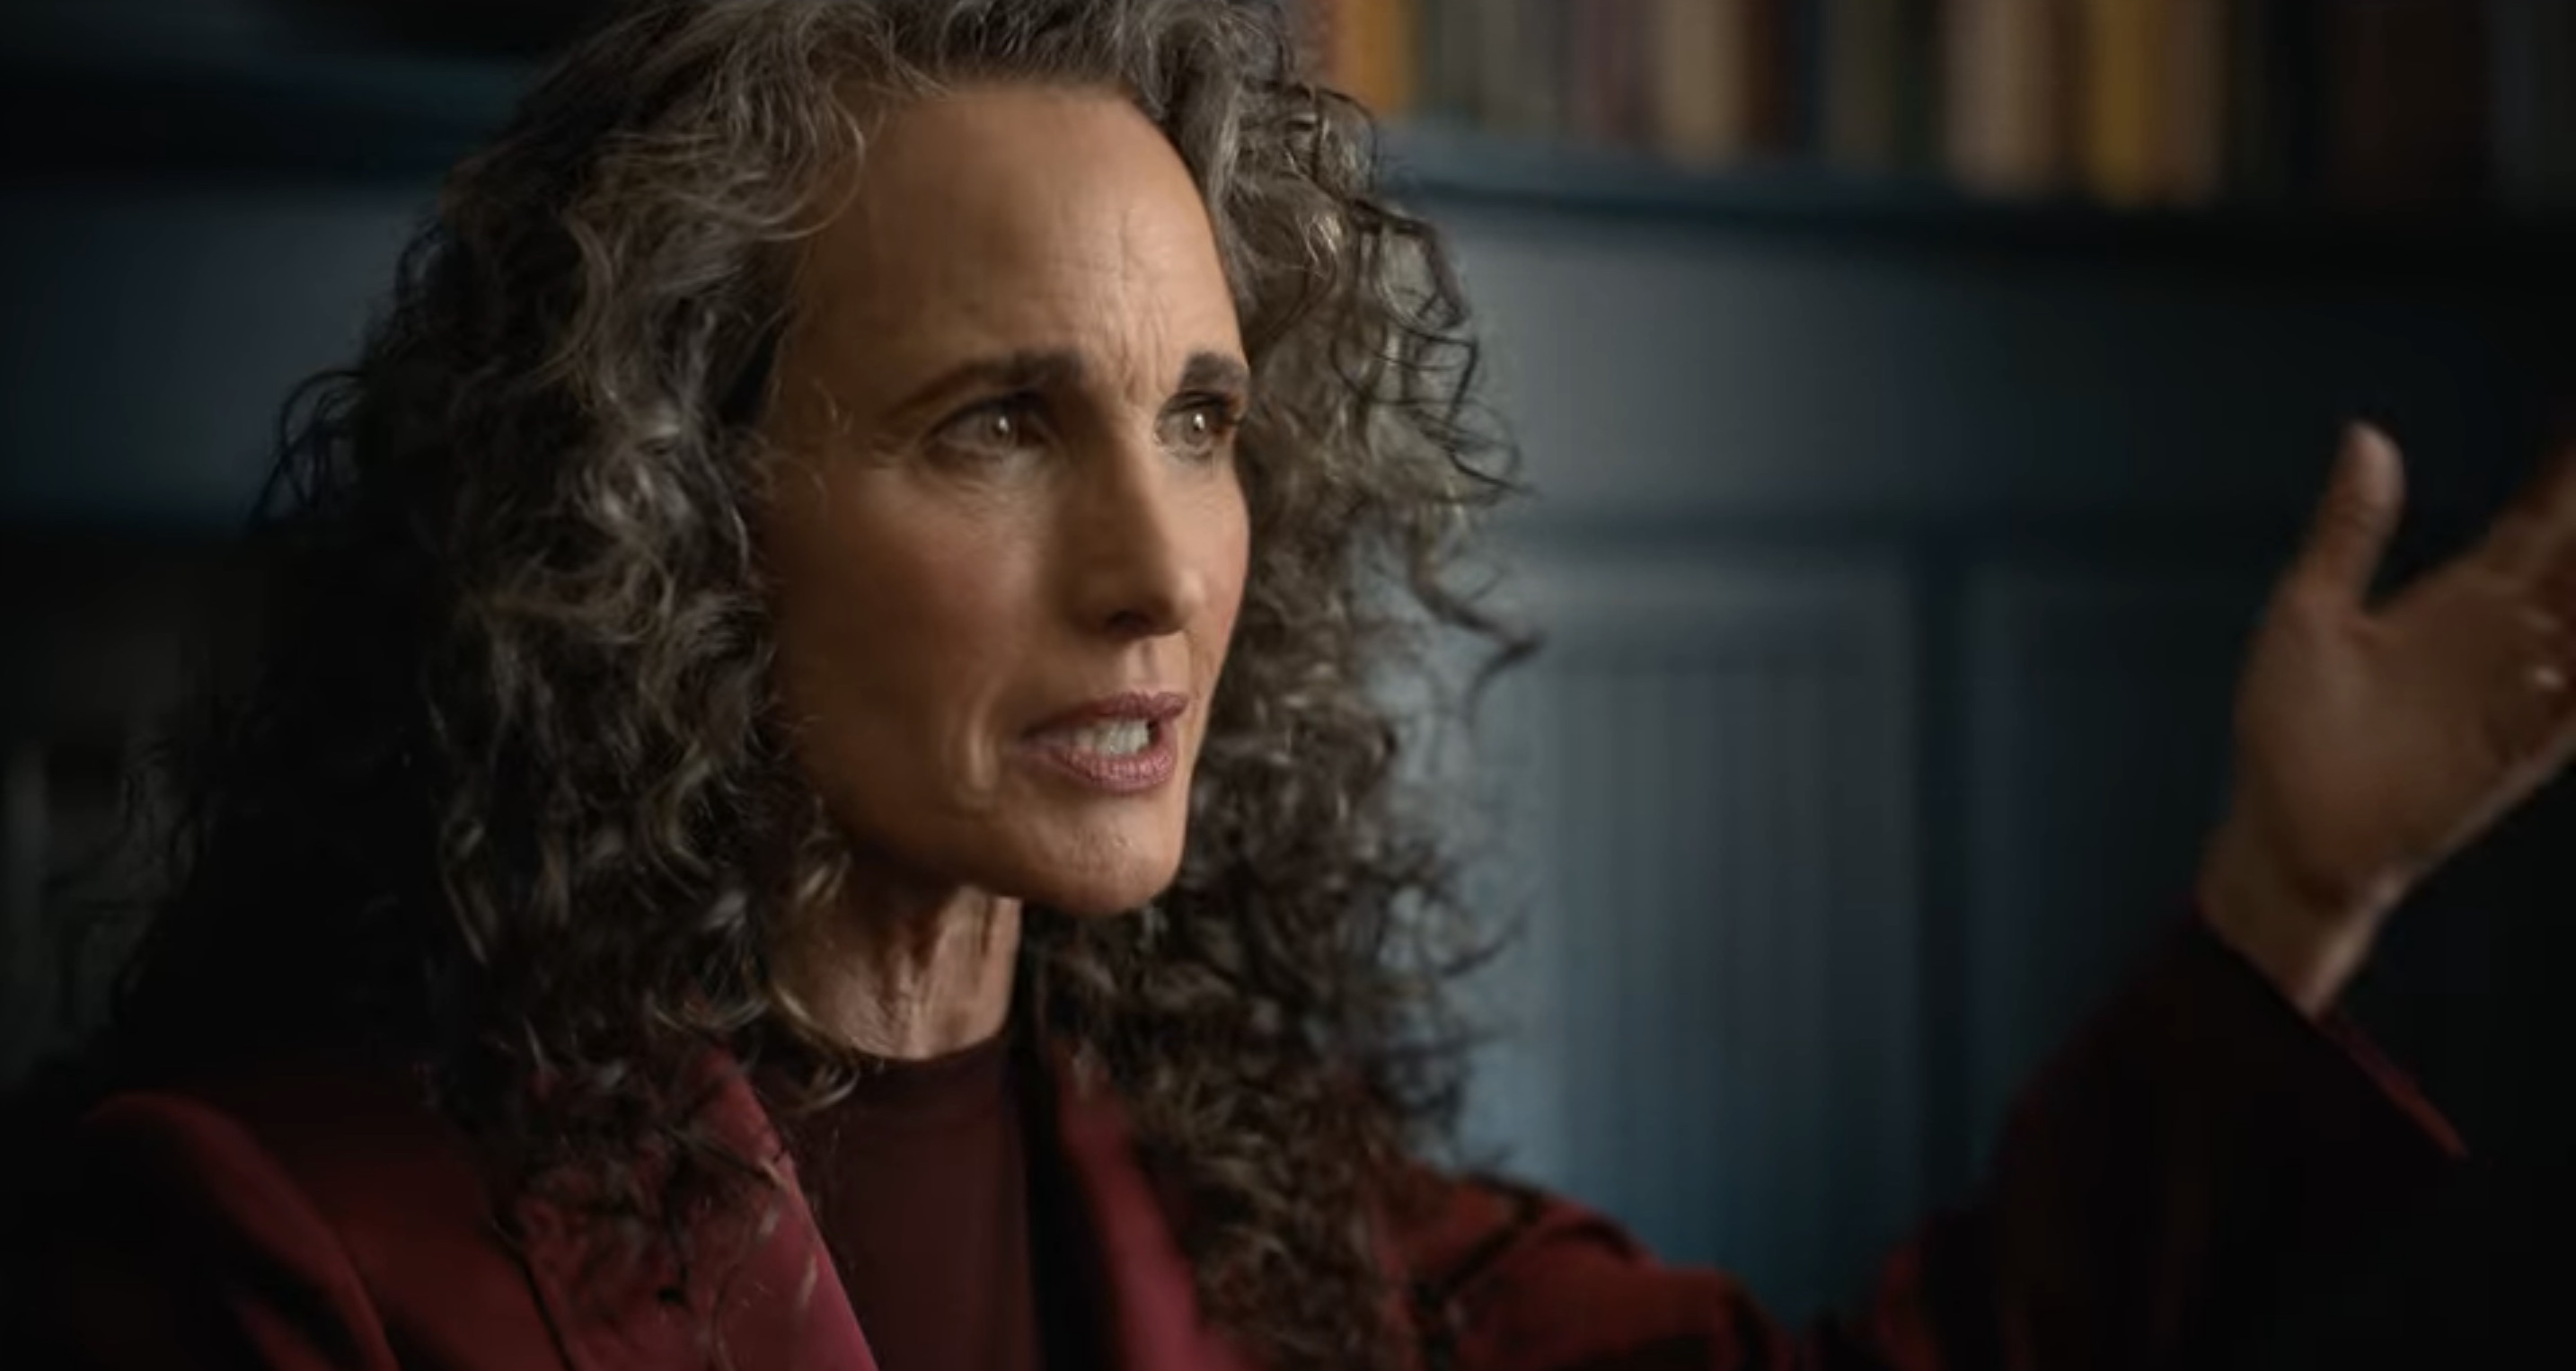 Along for the Ride Cast on Netflix - Andie MacDowell as Victoria